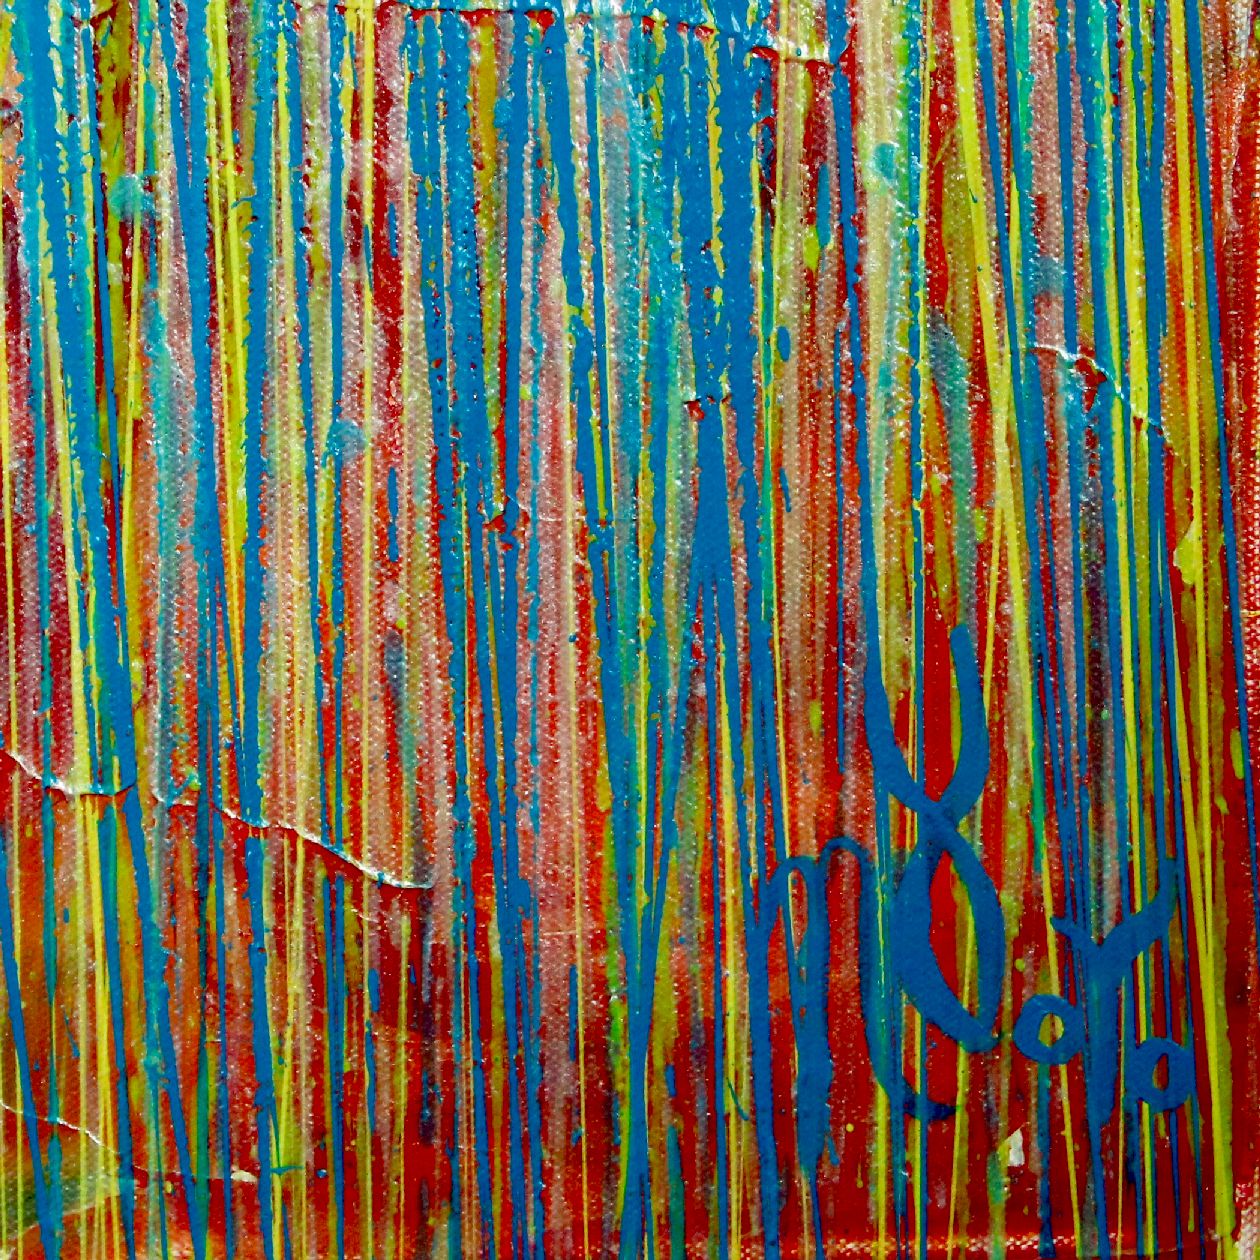 SOLD - Daring natural synergy | Energetic abstract painting by Nestor Toro (2020)